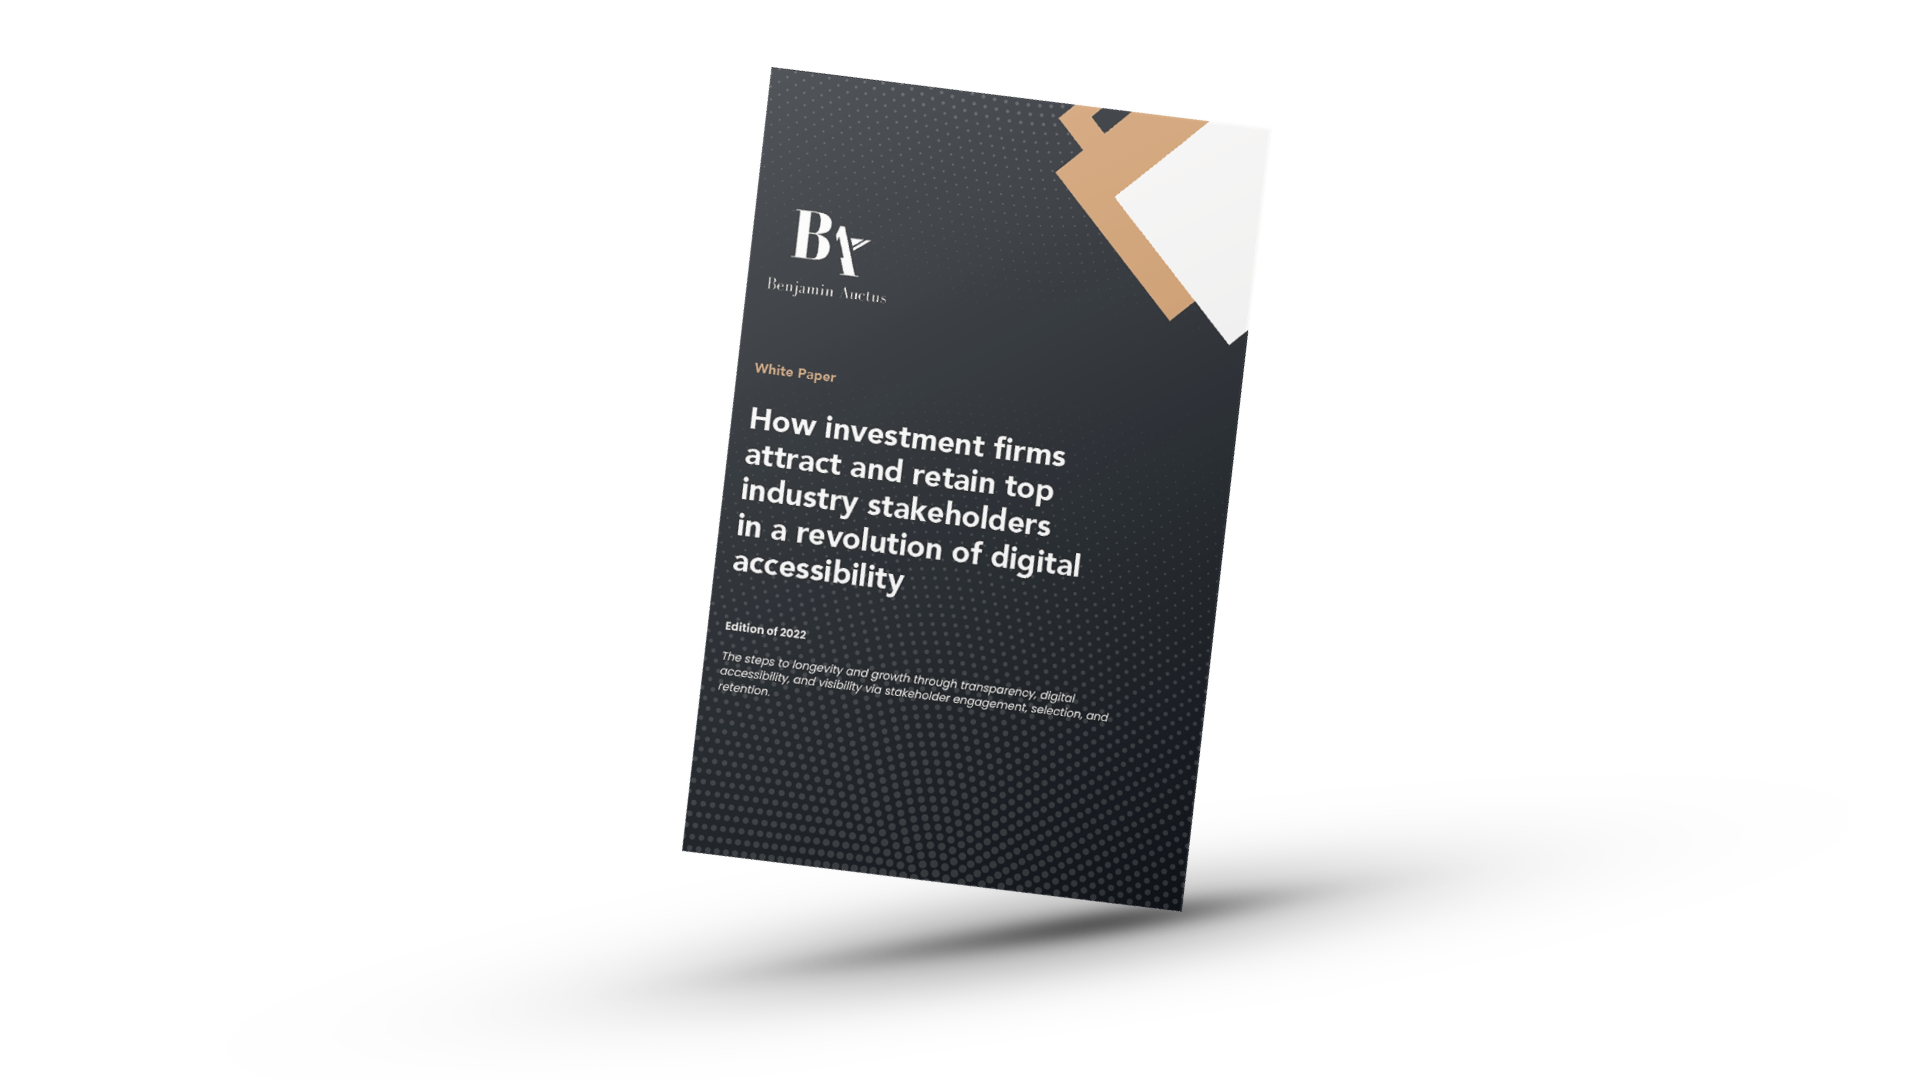 the WhitePaper on how investment firms attract and retain top industry stakeholders